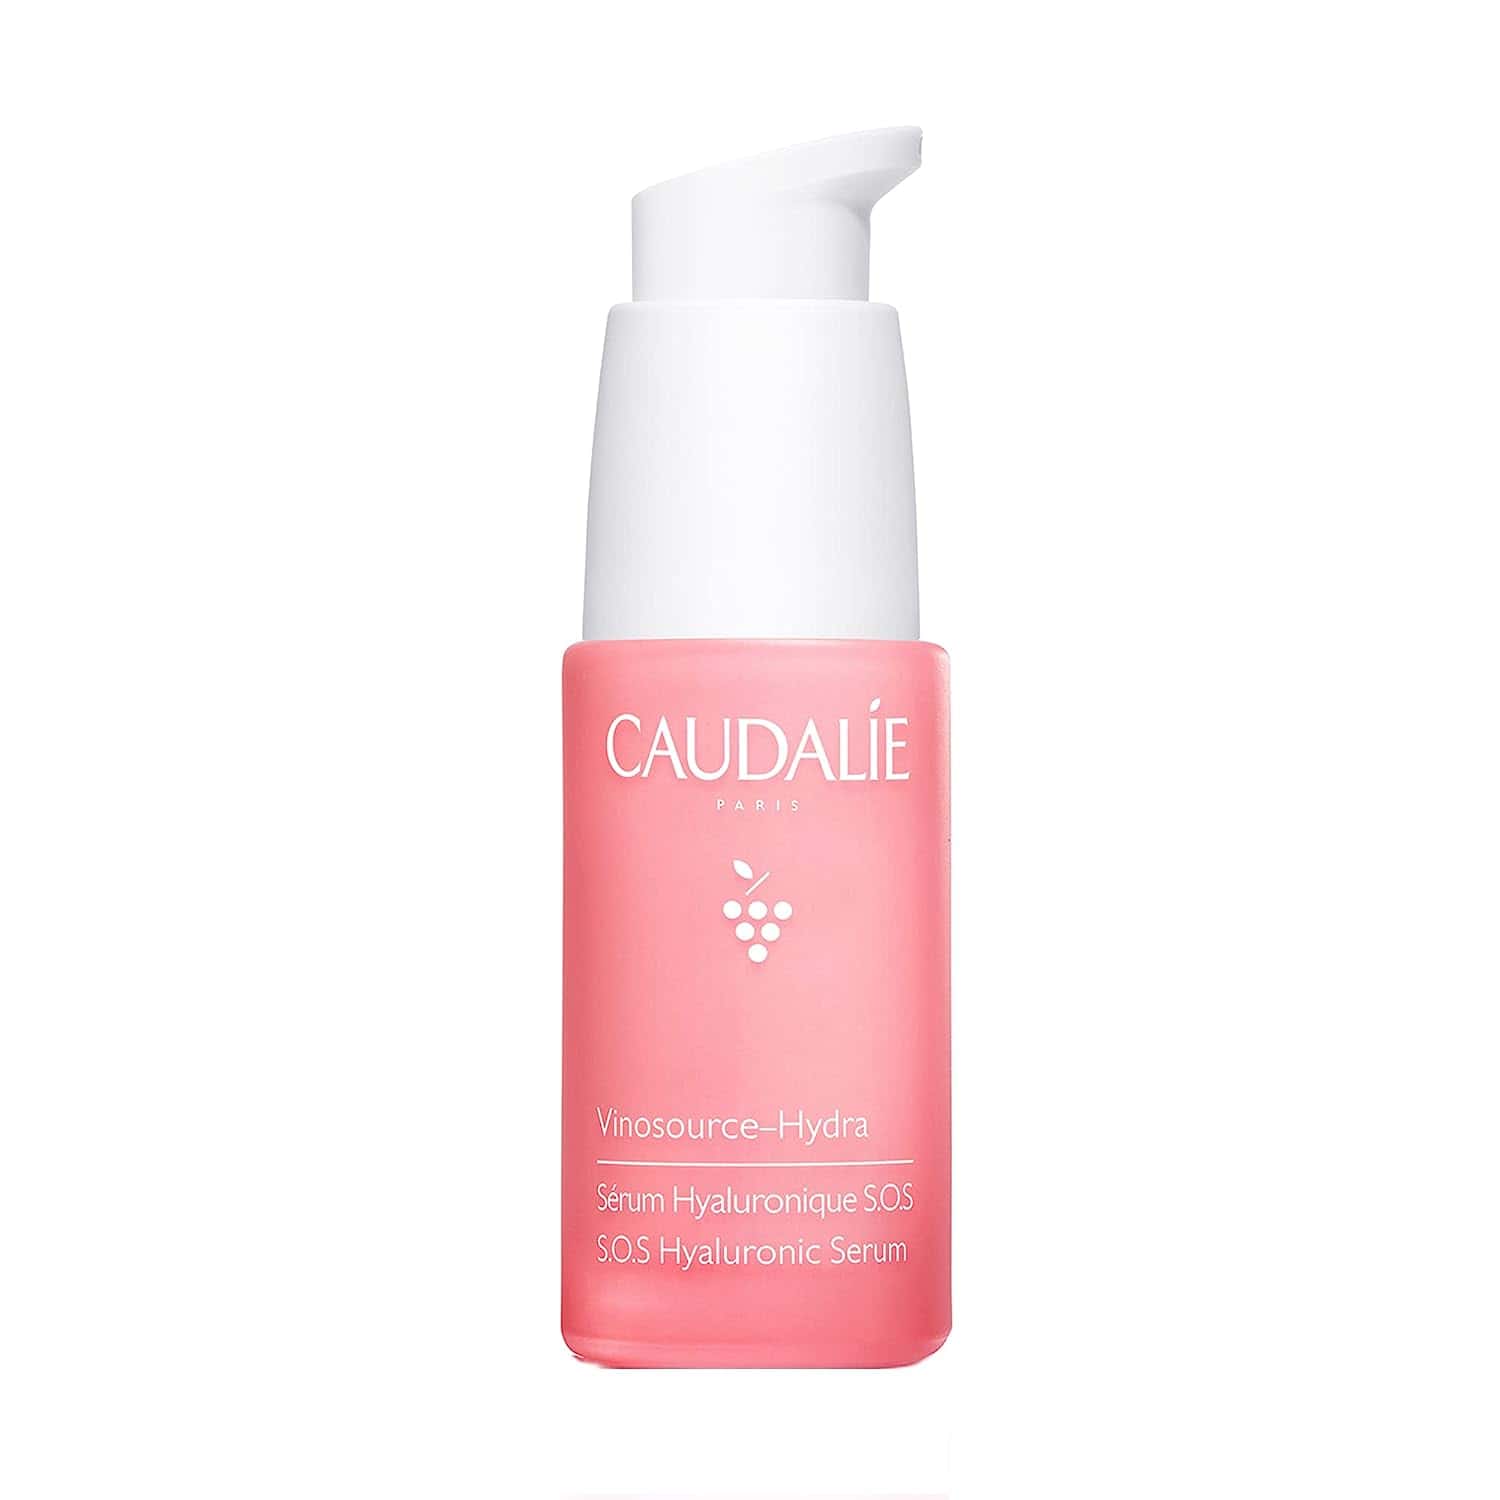 Caudalie Vinosource S.O.S. Hyaluronic, Hydrating and Thirst Quenching Serum